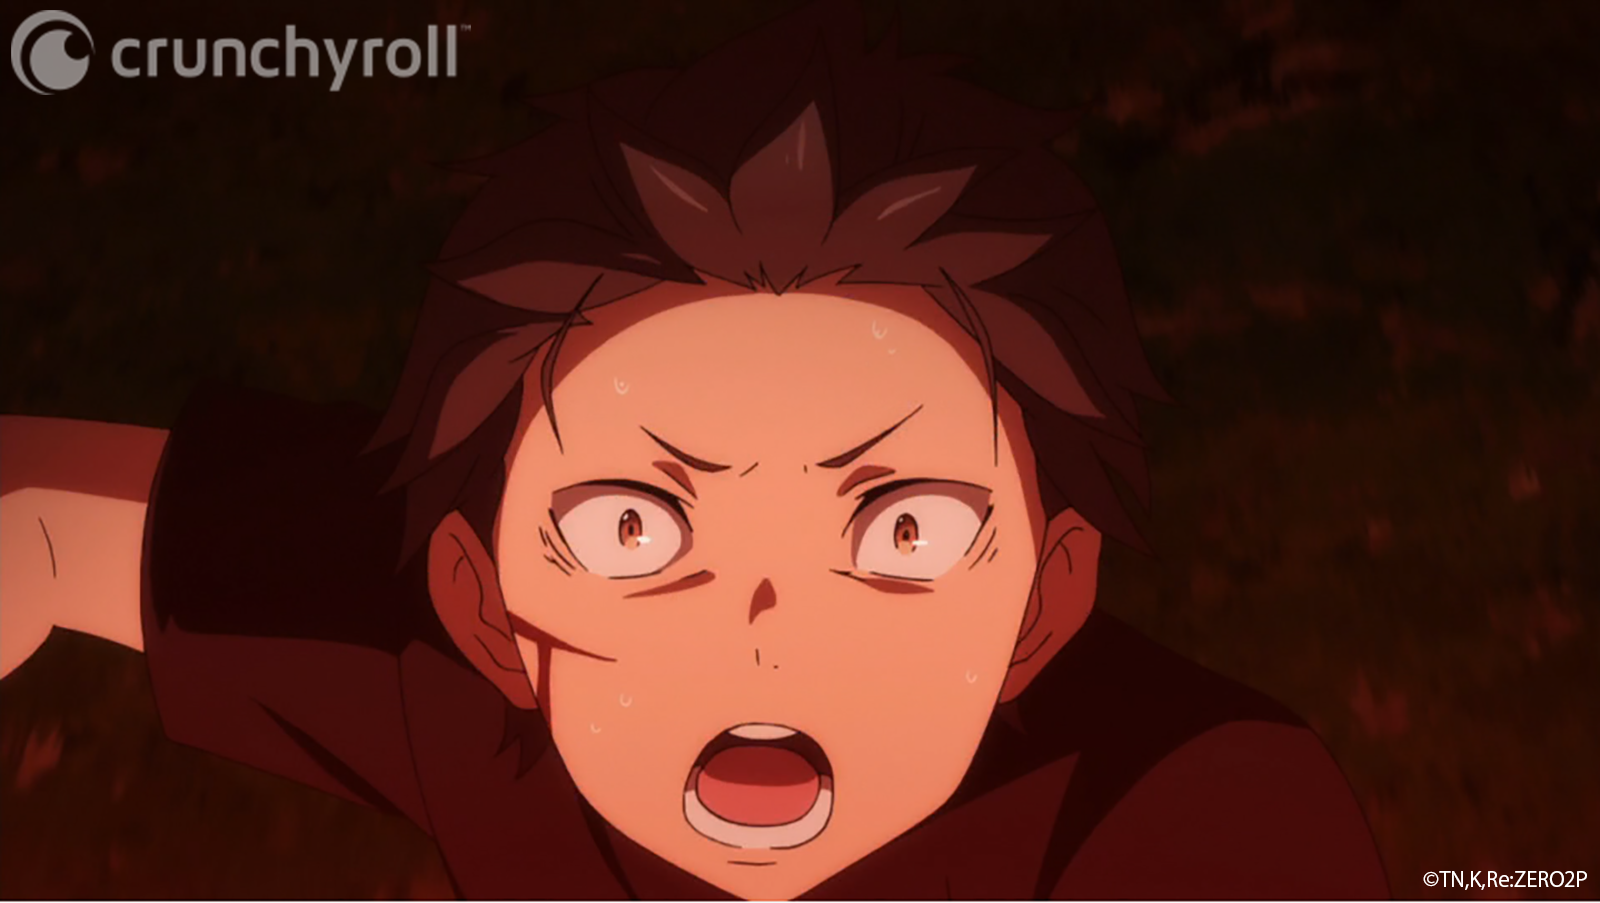 Natsuki Subaru attempts to flee from a murderous Rem in a scene from the Re:ZERO -Starting Life in Another World- TV anime.